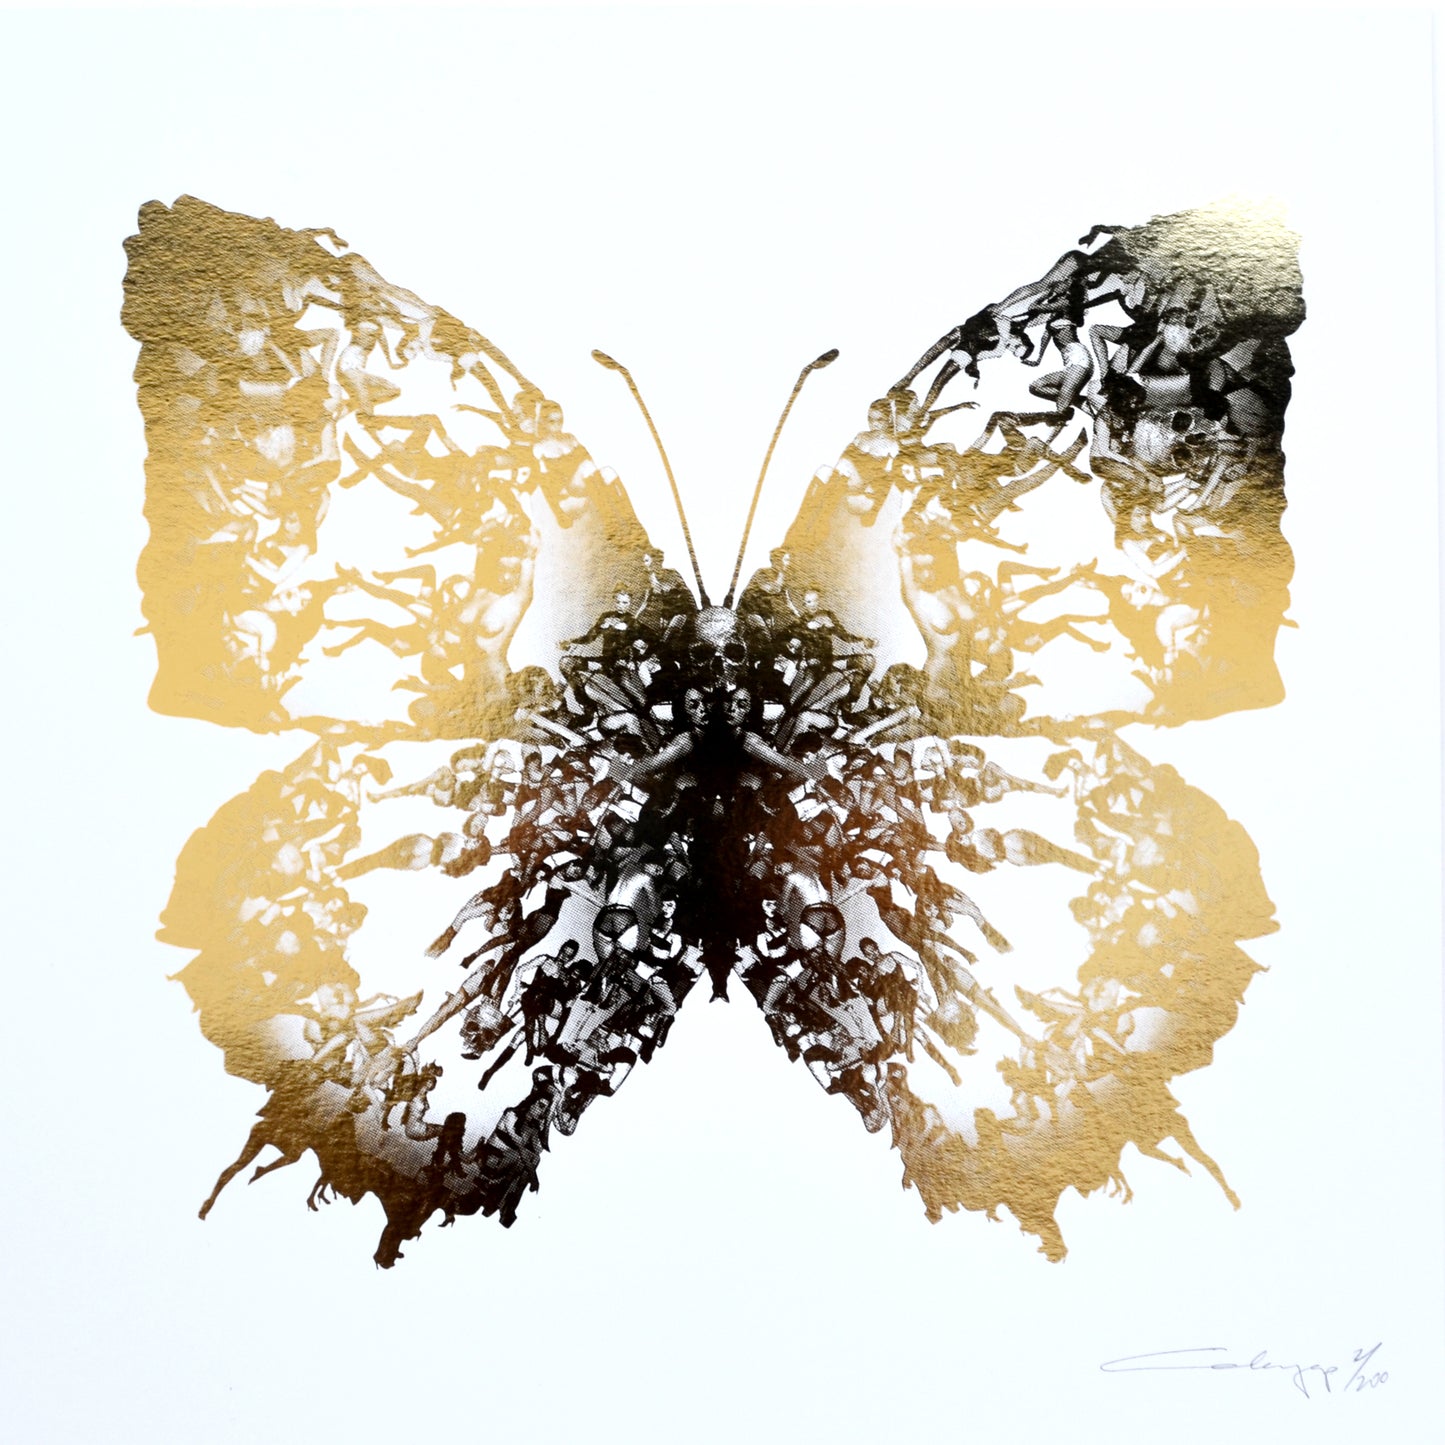 Cassandra-Yap-Deliverance-White-Gold-Foil-Limited-Edition-Butterfly